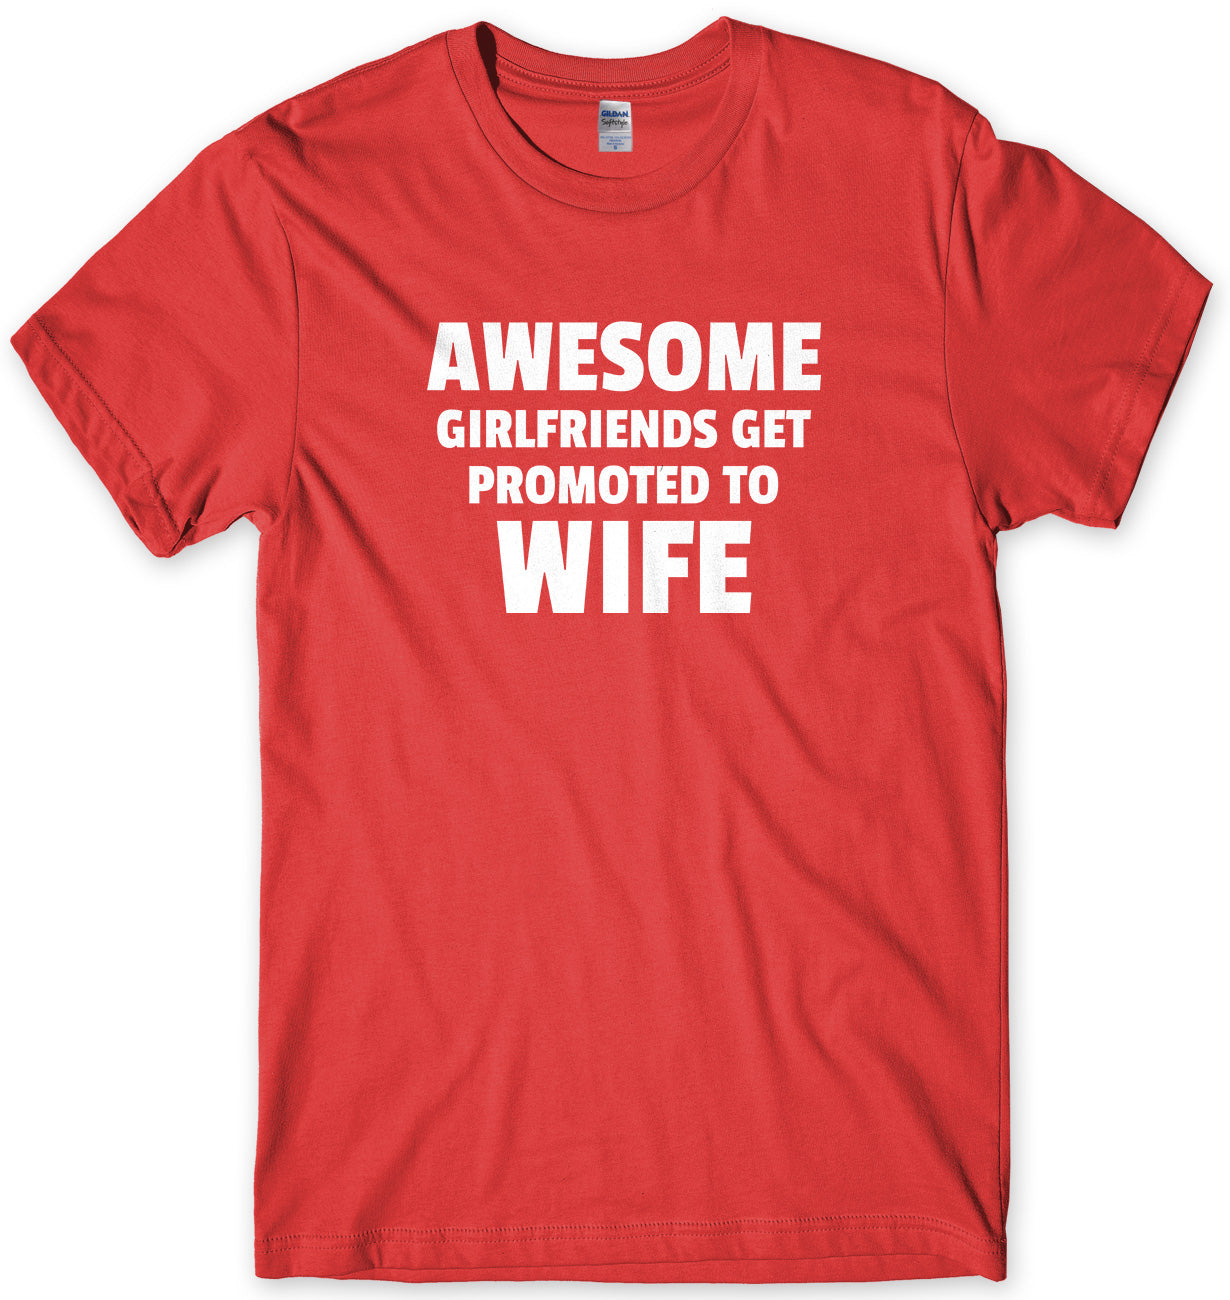 Awesome Girlfriends Get Promoted To Wife Mens Unisex Style T-Shirt - StreetSide Surgeons